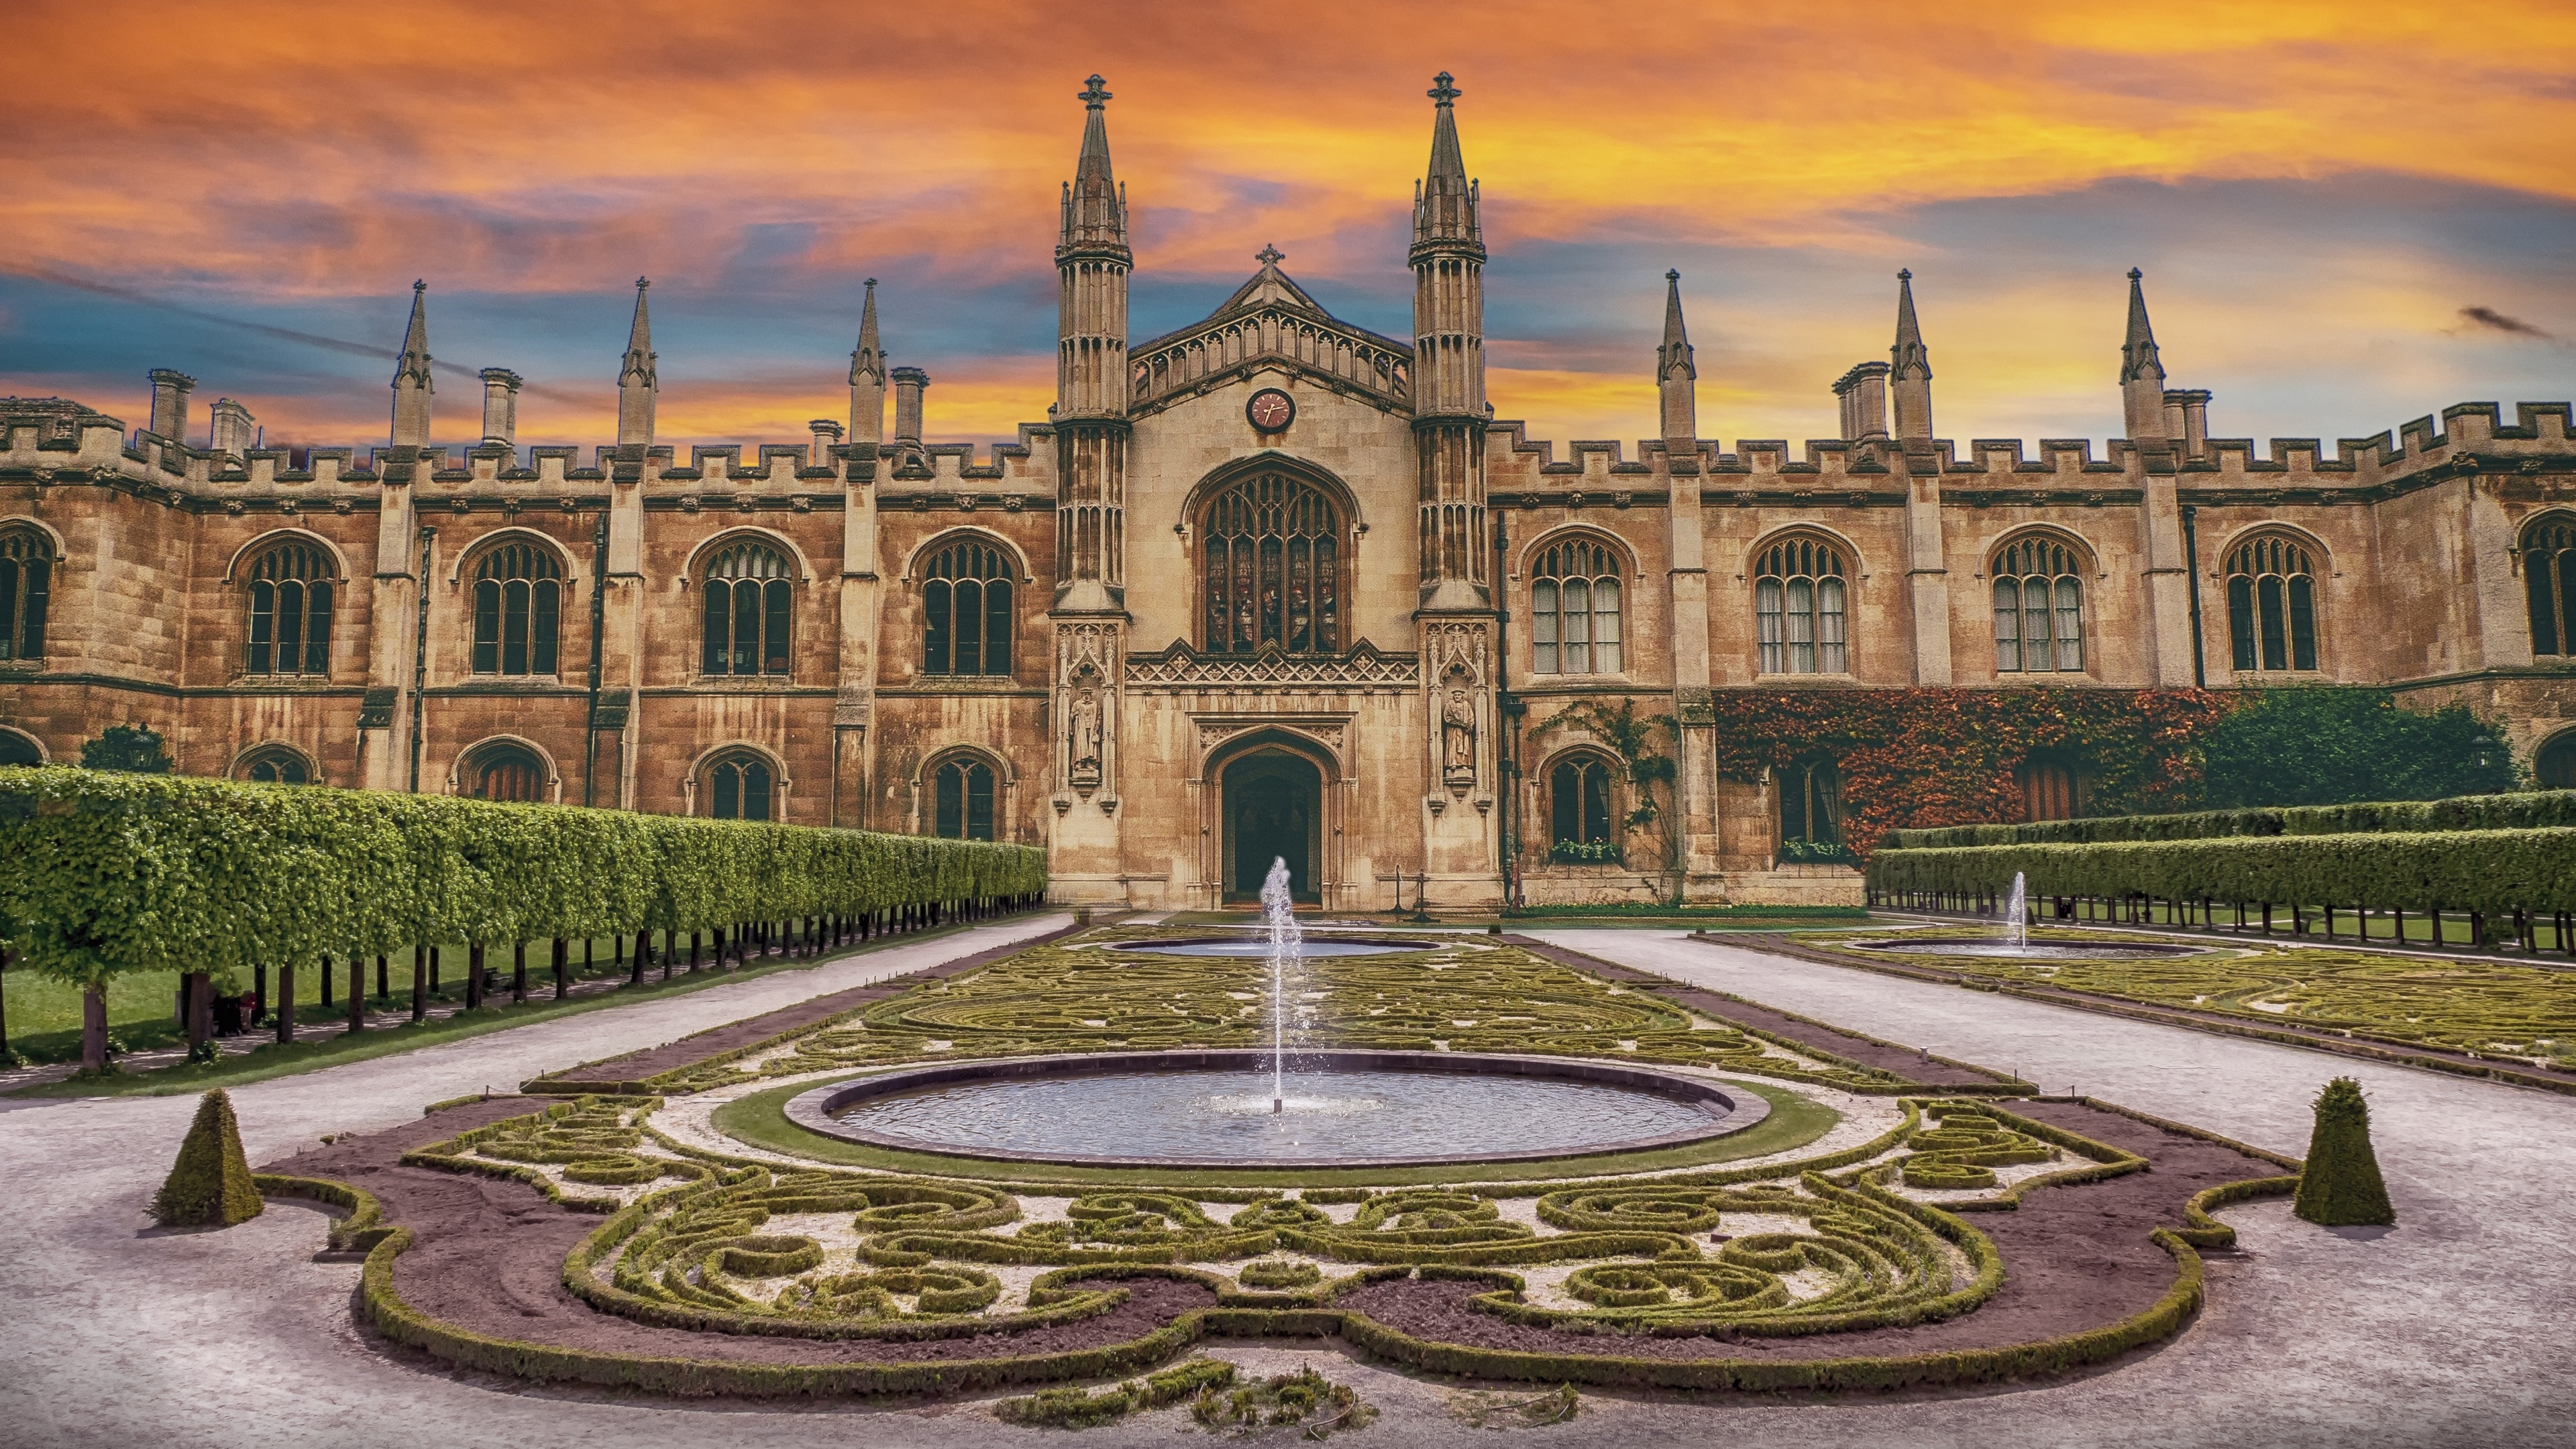 Palace: Corpus Christi College, Established in 1352 by the Guild of Corpus. 3840x2160 4K Wallpaper.